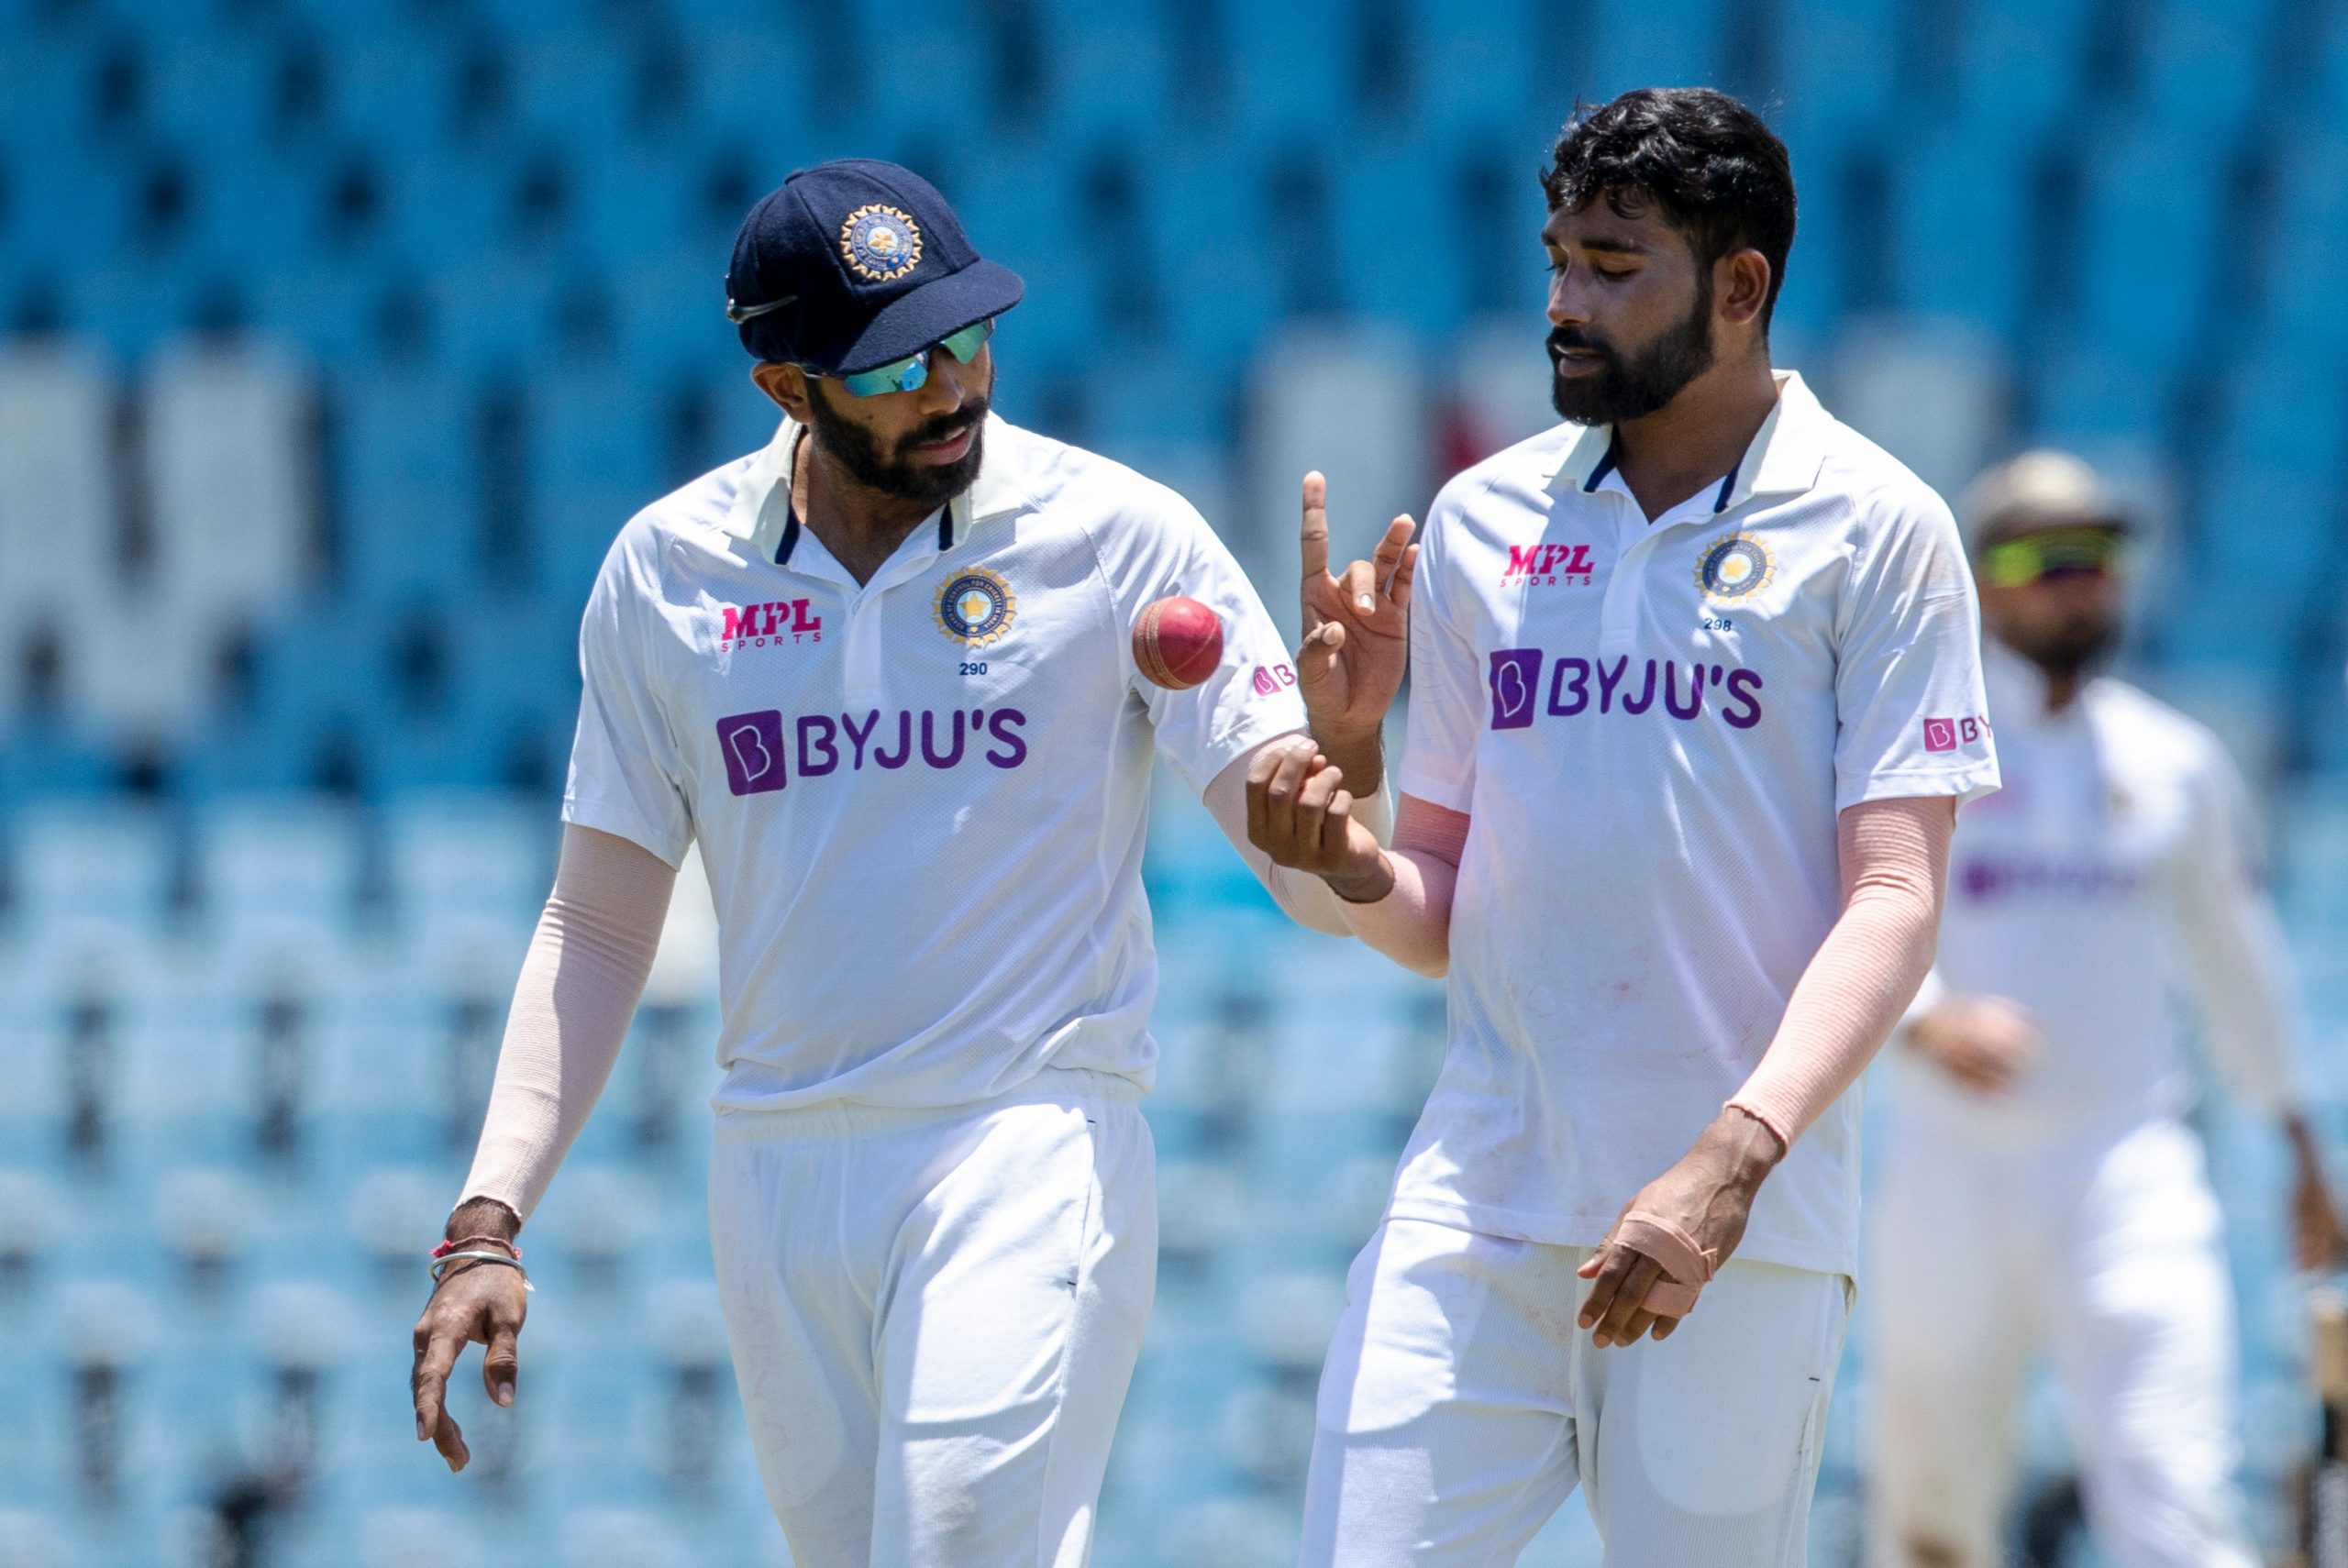 Johannesburg Test: Mohammed Siraj is back on field, takes strides to bowl